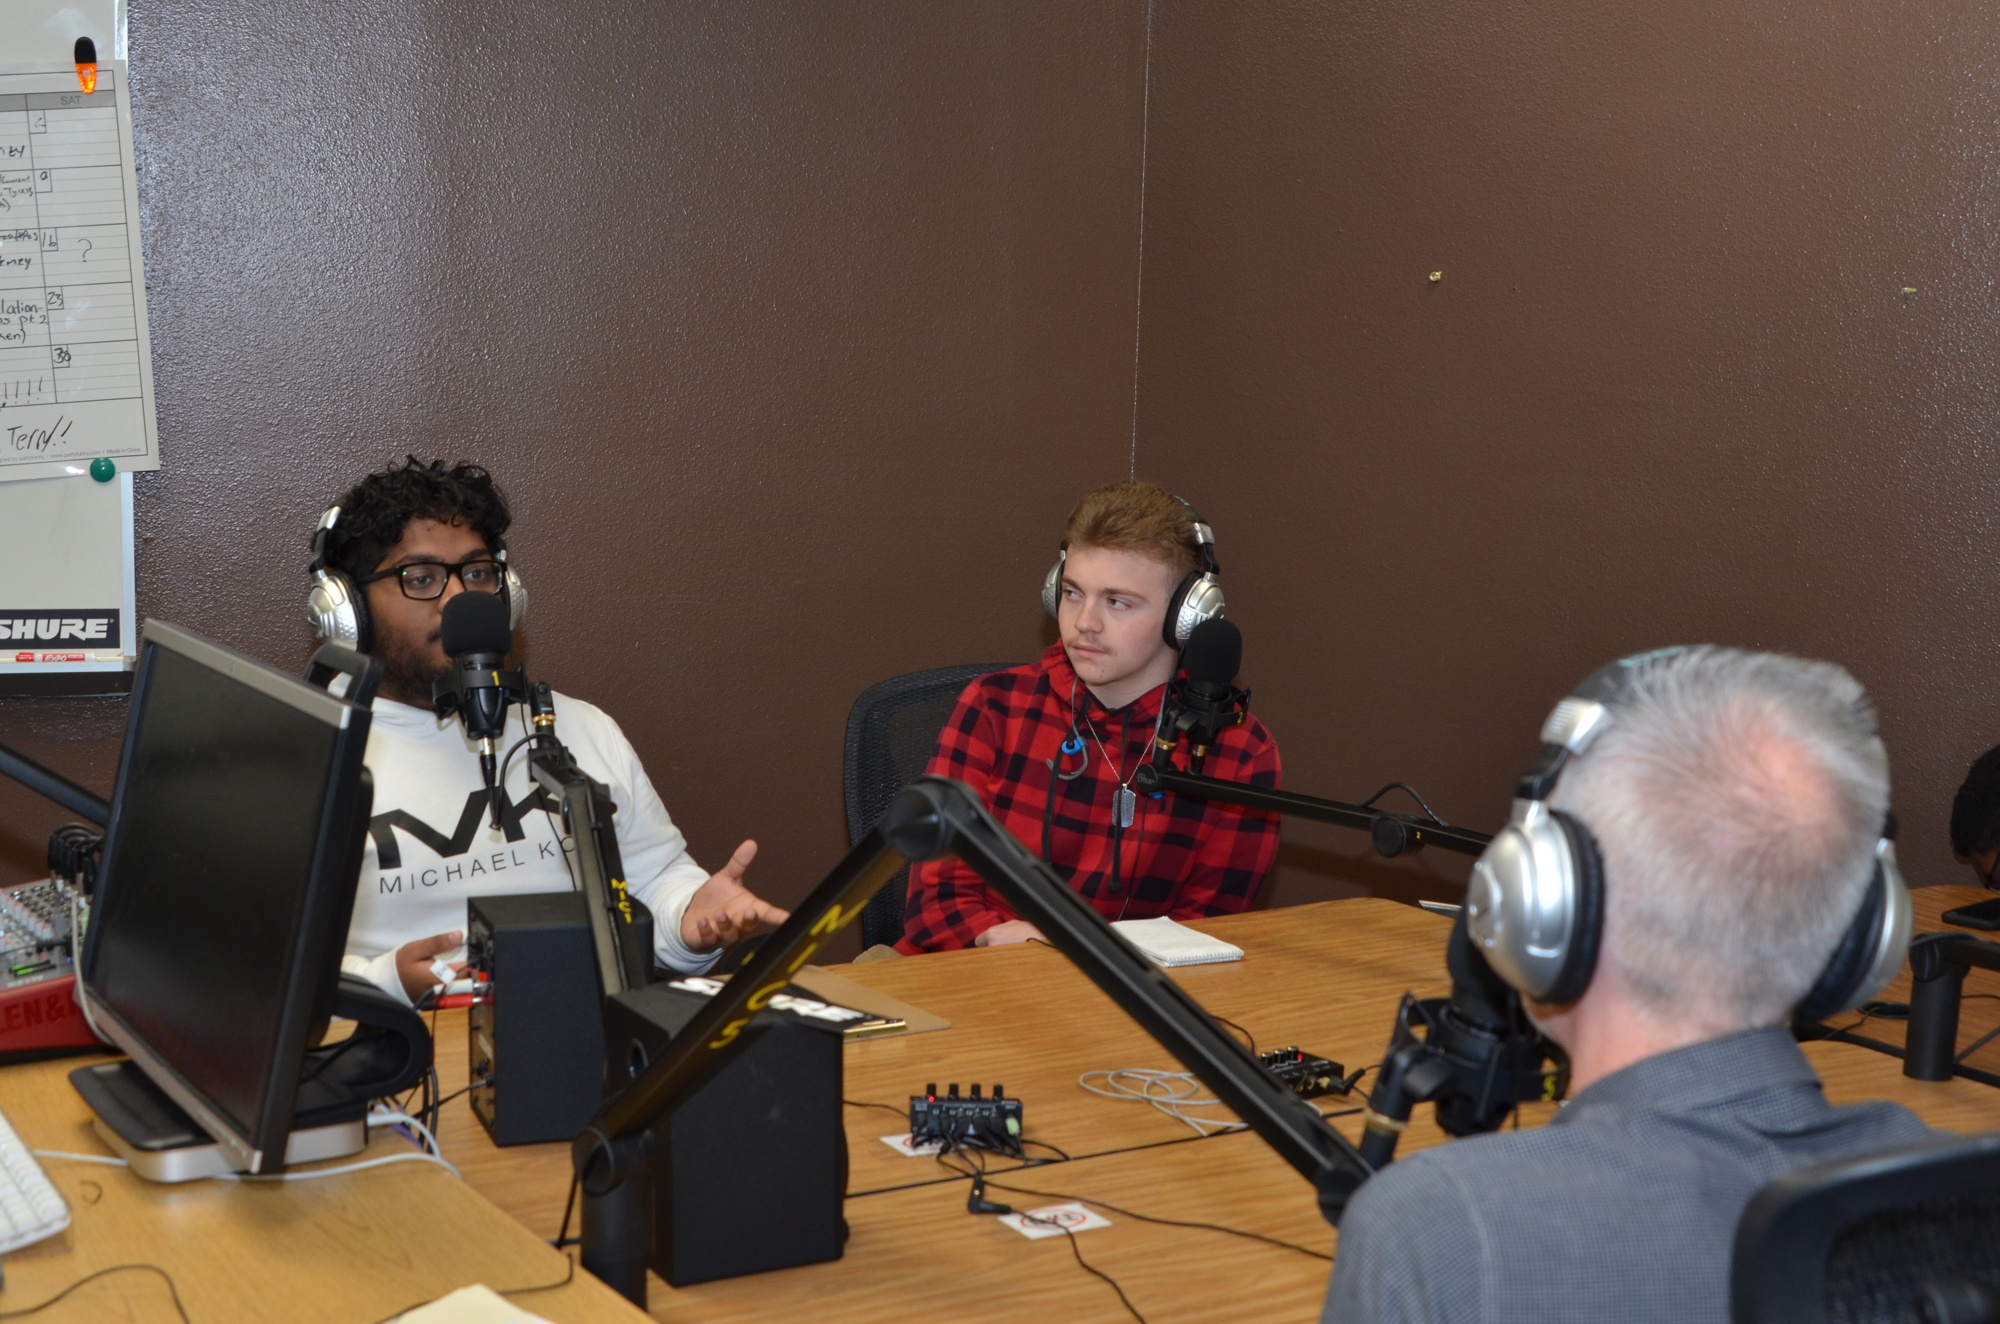 Jonathan Ramjattan, left, and Zachary Ringer led the podcast with introductions.